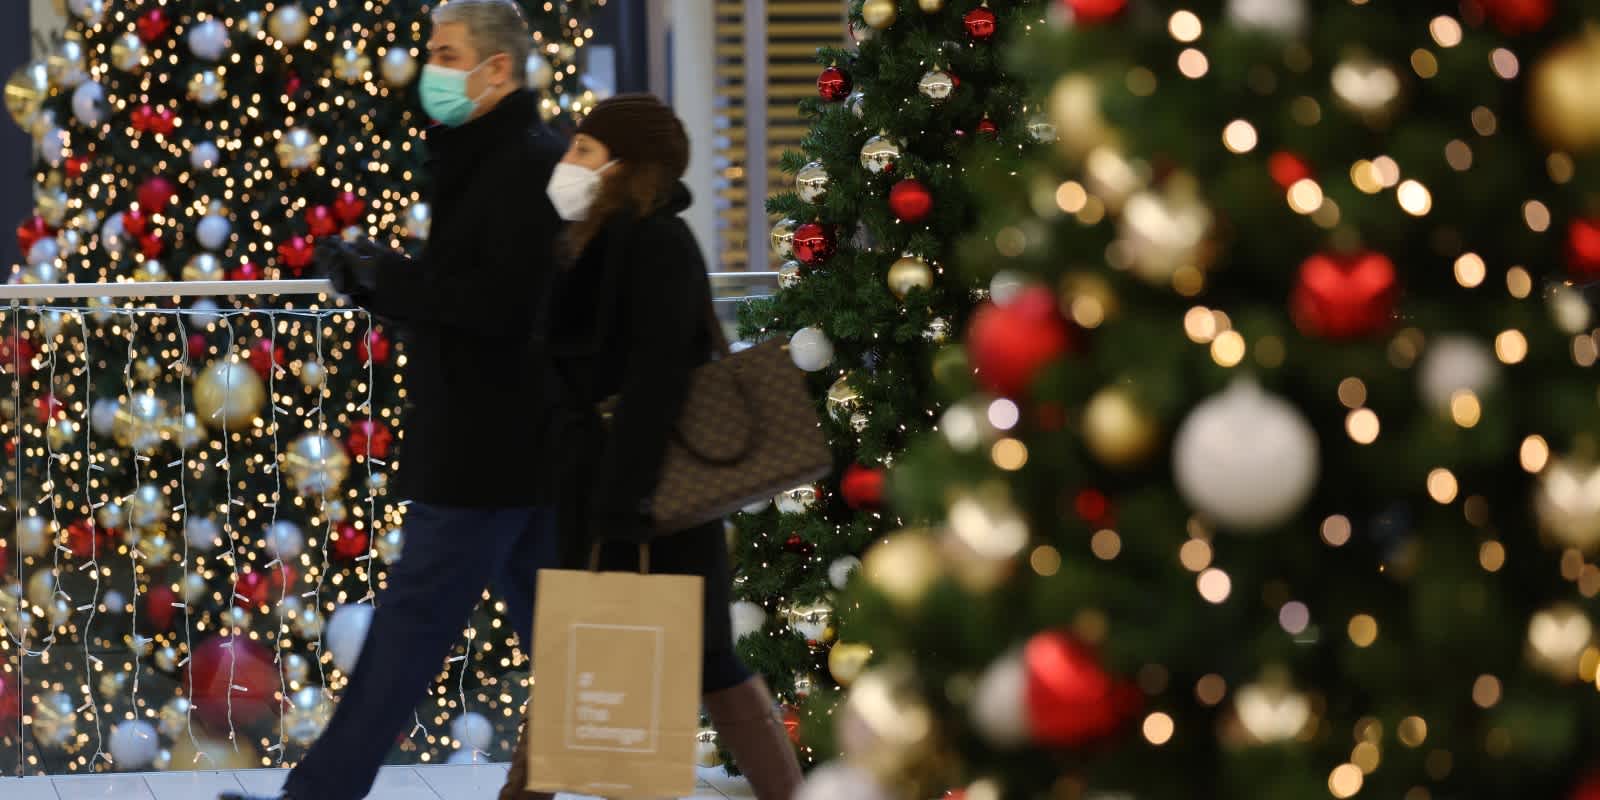 Year-end holidays have traditionally been a time of year for retailers when sales soar. In recent years, that trend has been shifting. Looking to 2020, the pandemic has changed everything. And low consumer confidence, combined with consumer fear of coronavirus, is set to make this year’s holiday shopping period unlike any others.